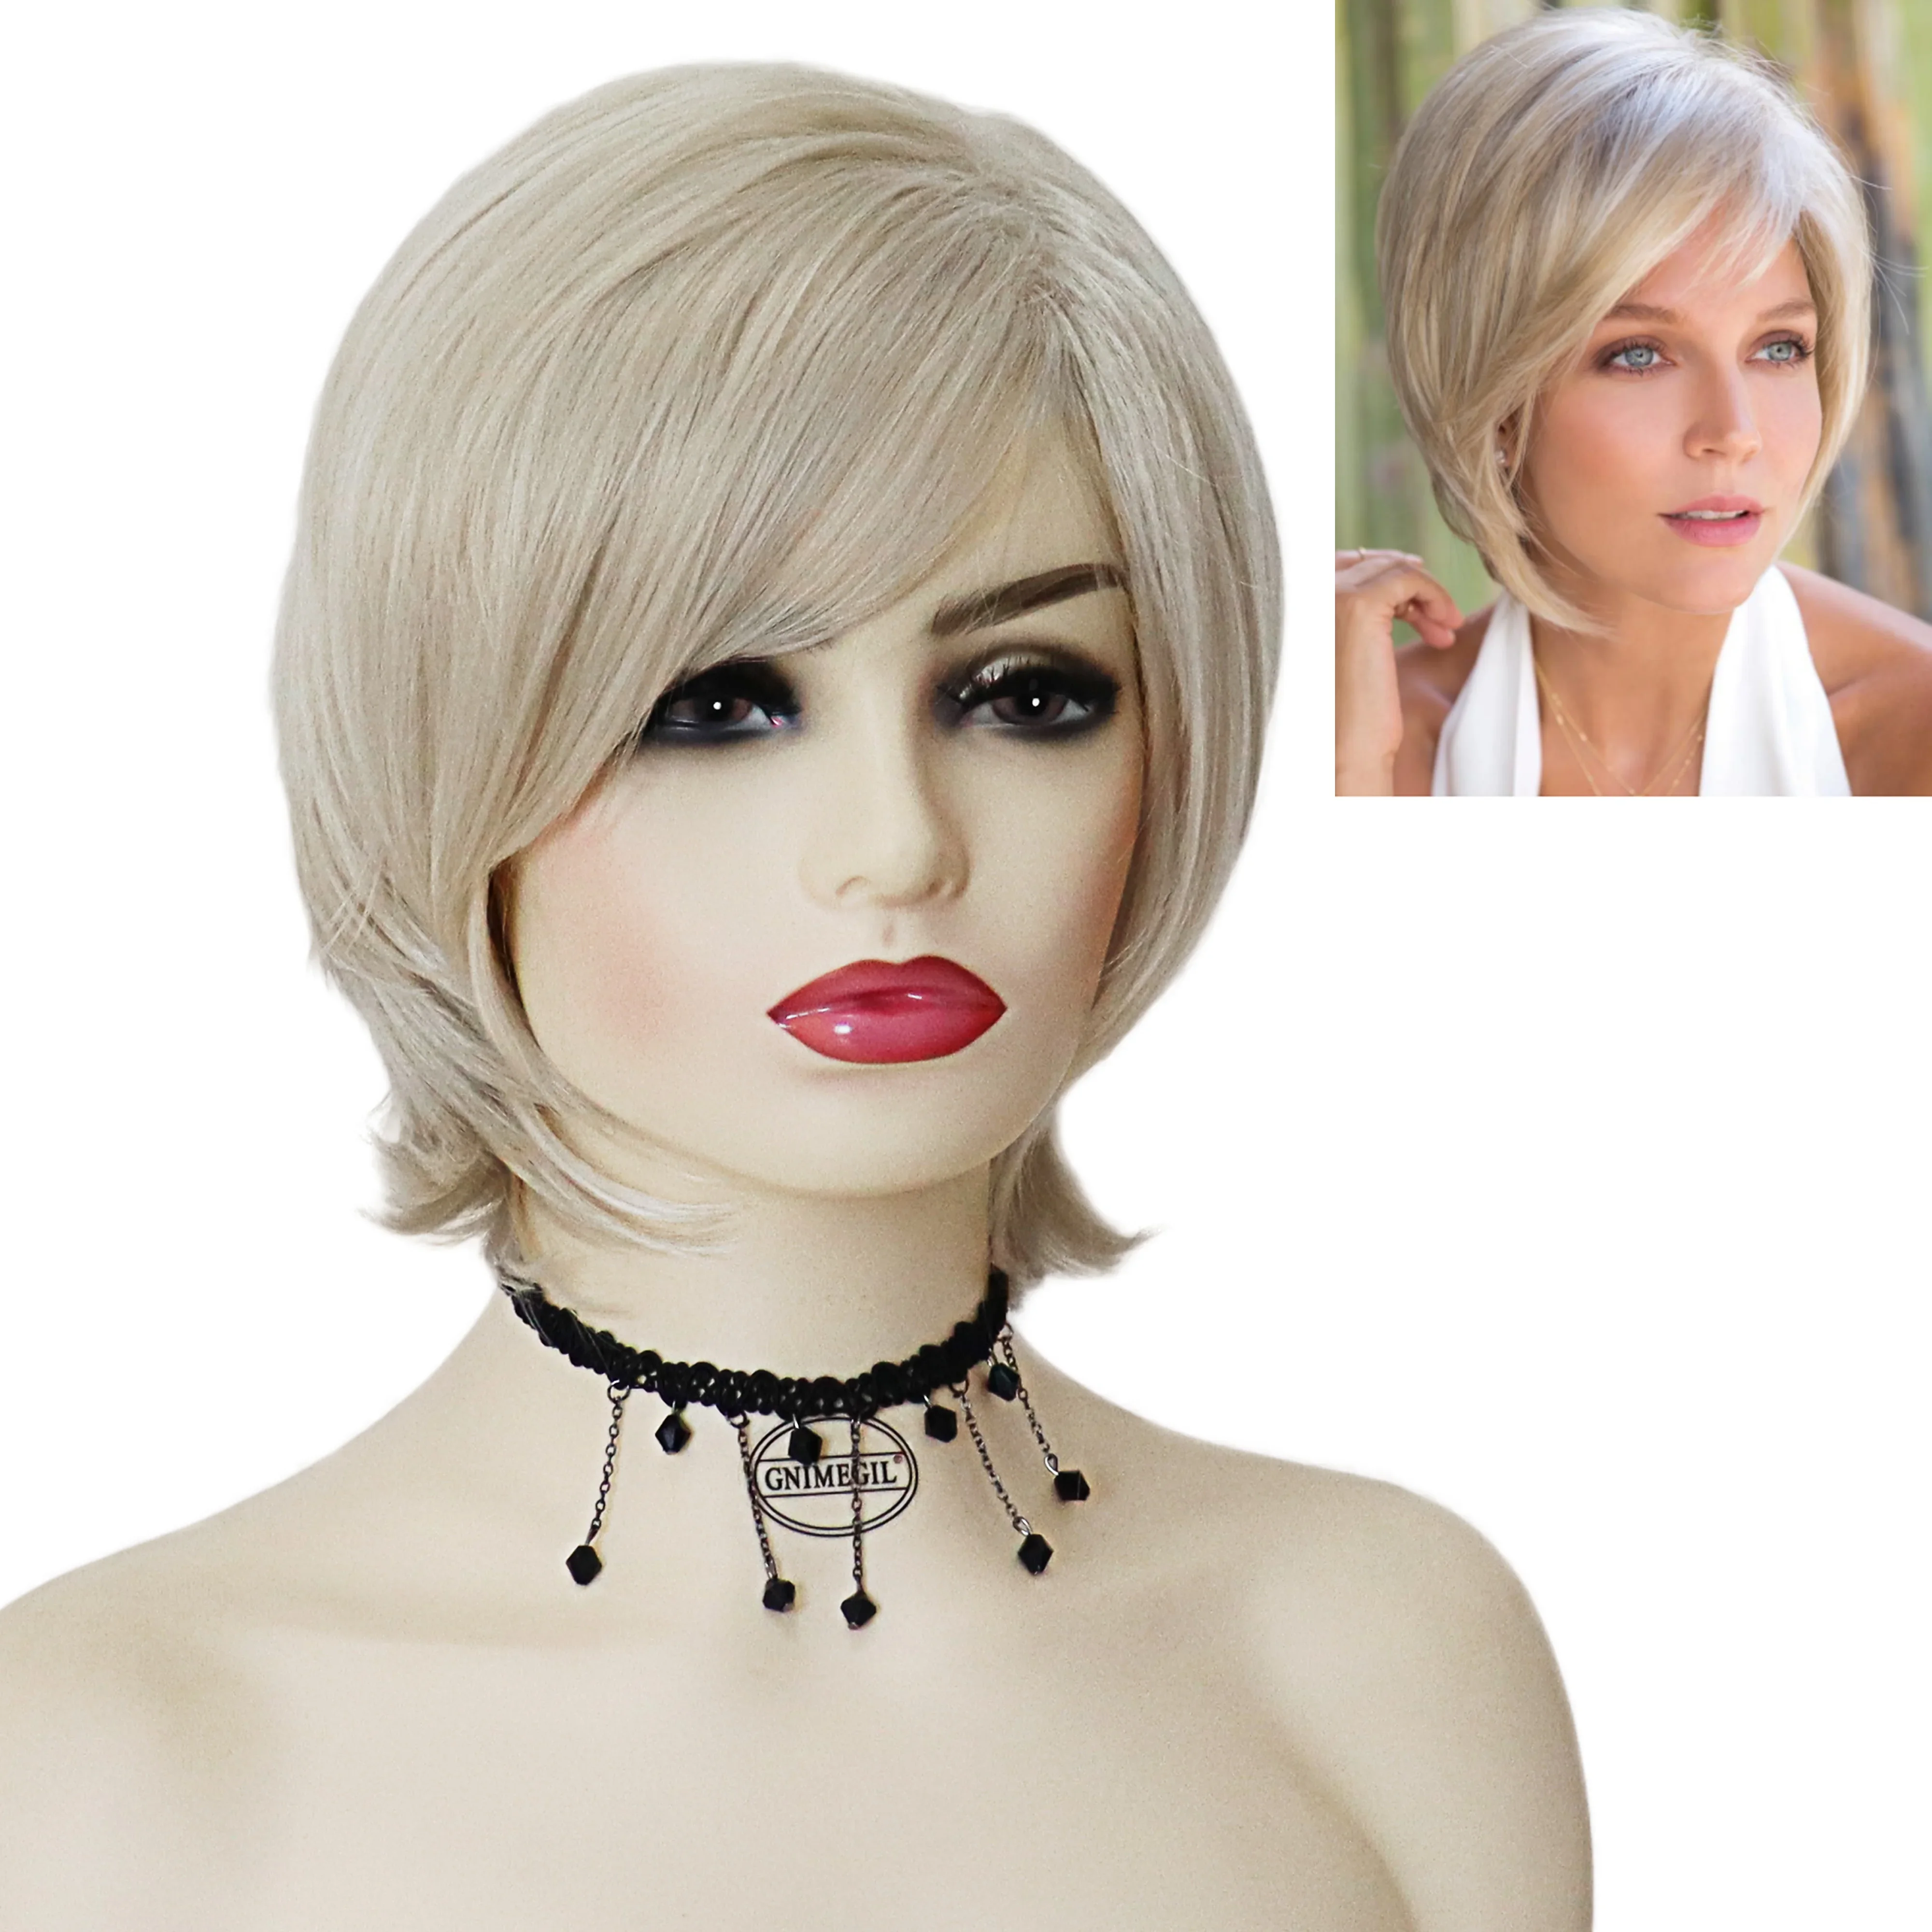 

GNIMEGIL Synthetic Blonde Wigs with Bangs for Women Short Bob Straight Hair Wig Female Cosplay Halloween Costume Lady Wig Girls